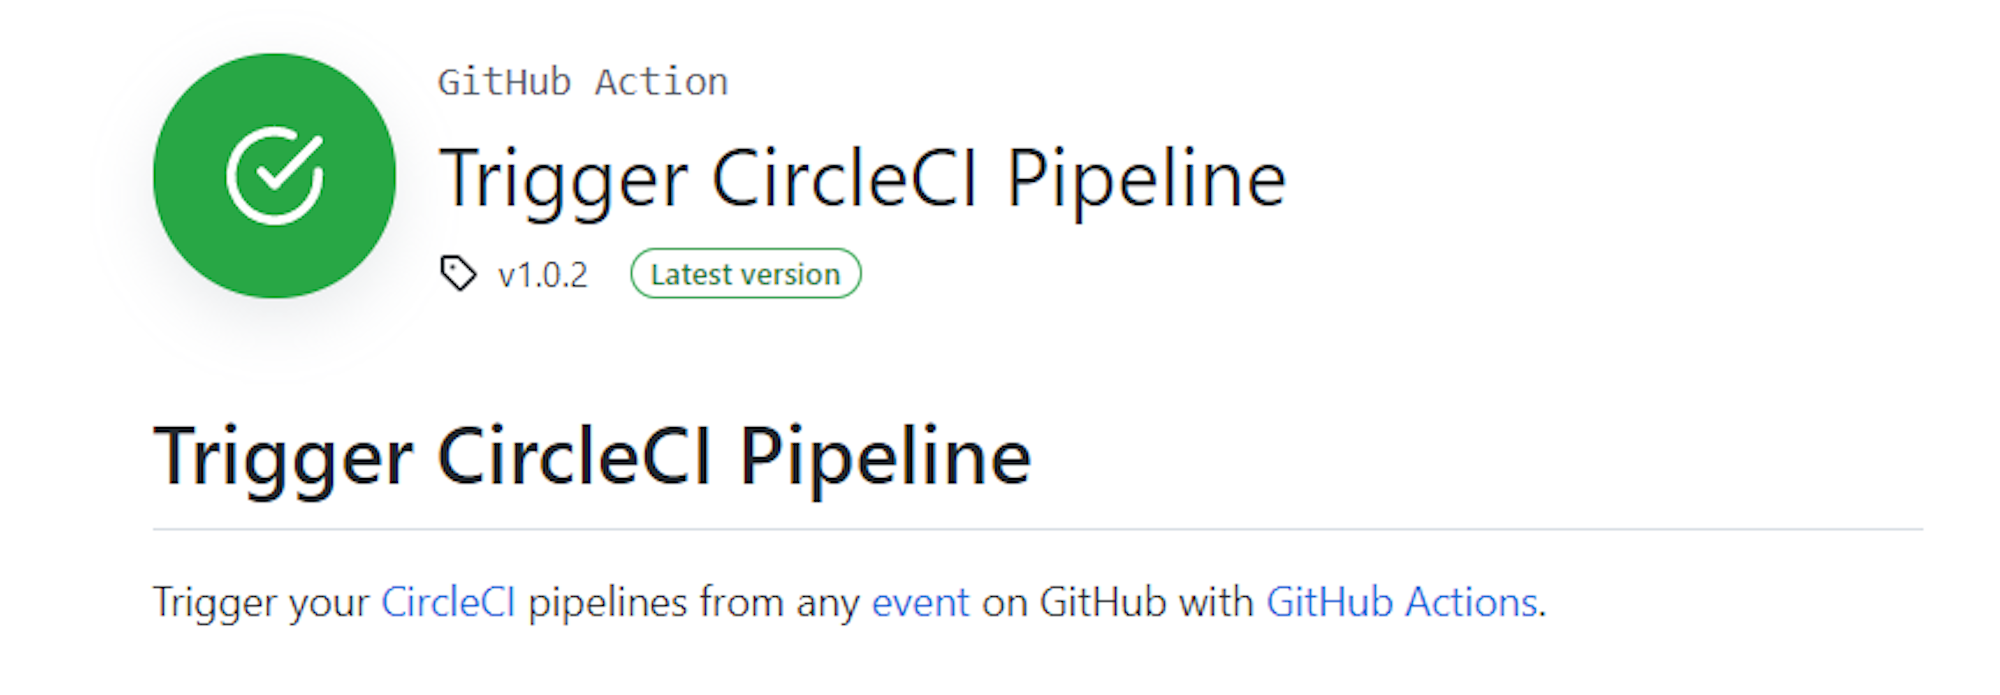 Trigger CircleCI Pipeline action listing in GitHub Marketplace